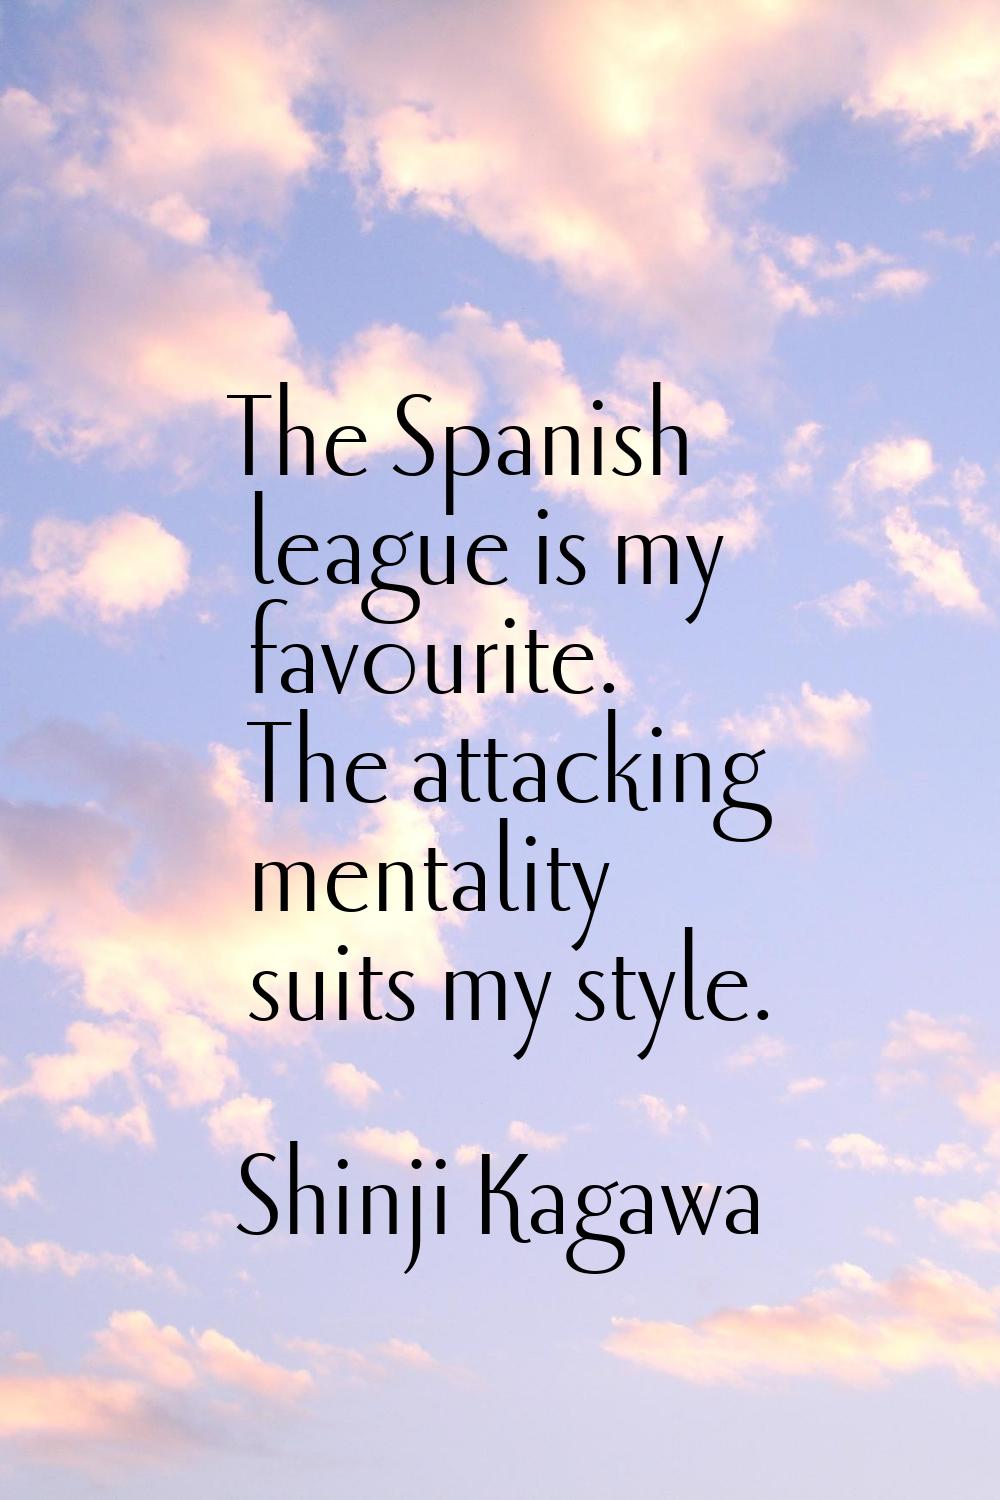 The Spanish league is my favourite. The attacking mentality suits my style.